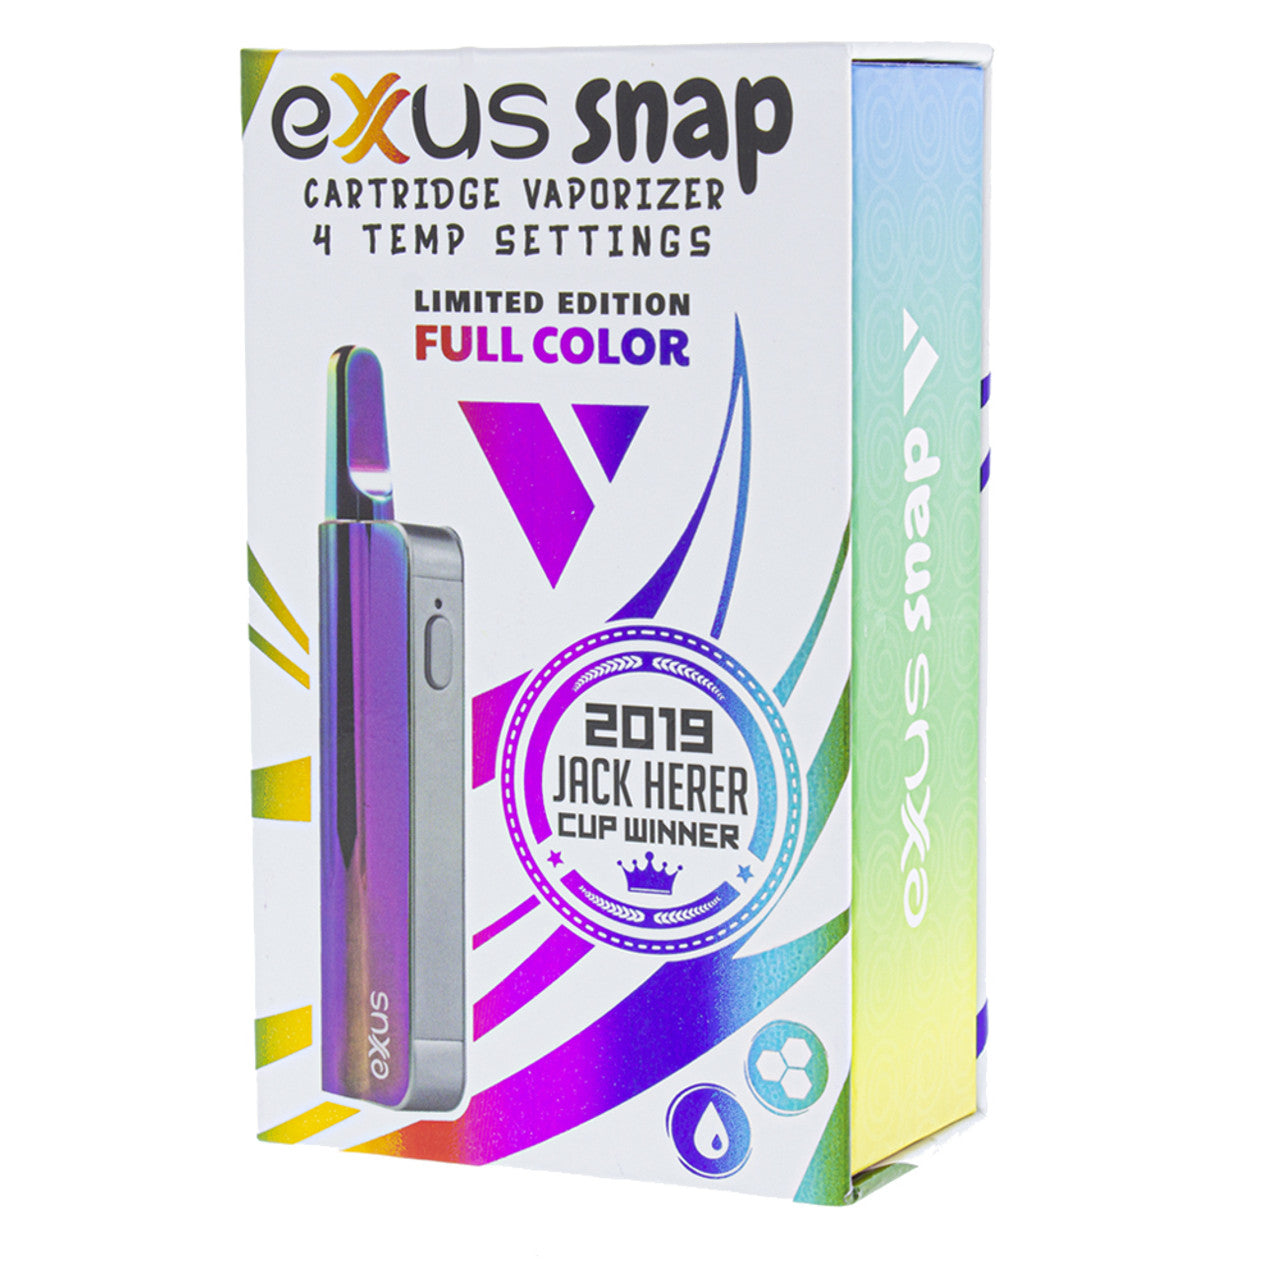 Exxus Snap - Variable Voltage 510 Cartridge Battery - Full color